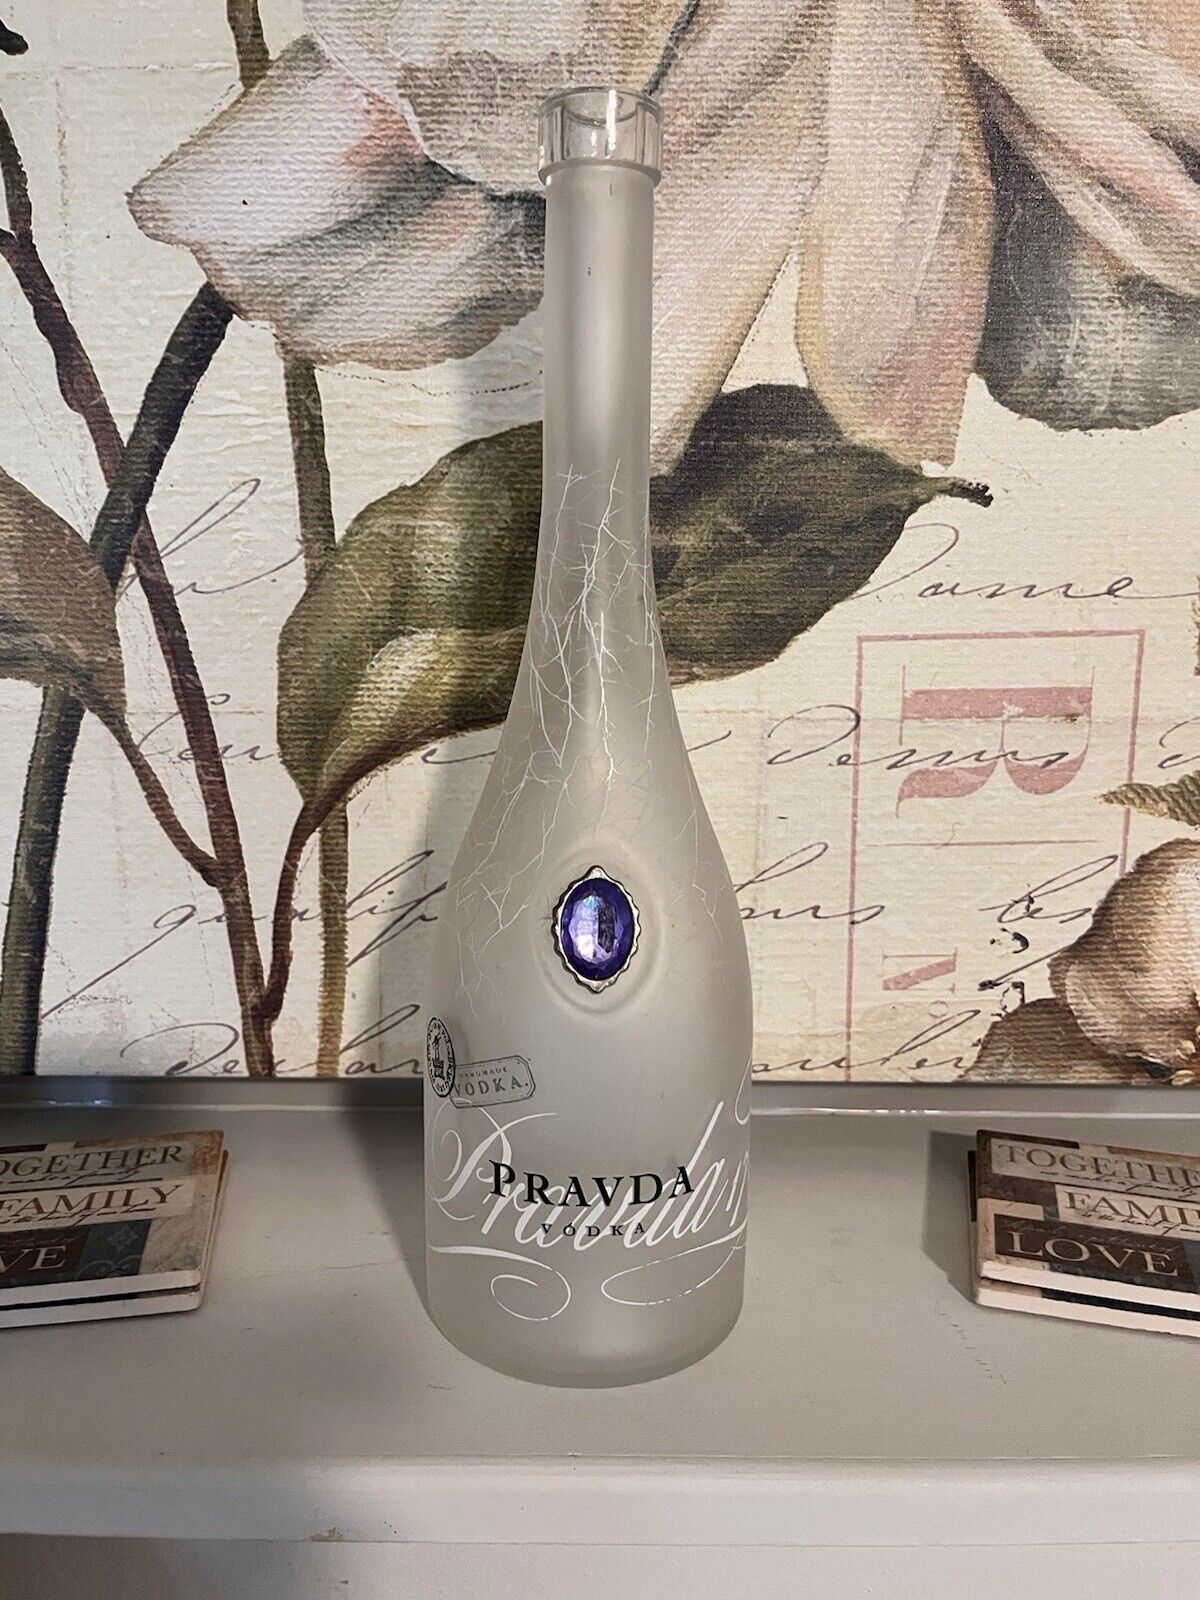 1 PRAVDA Vodka 1743 Empty Bottle for Collectible 13” Tall No Lid Preowned